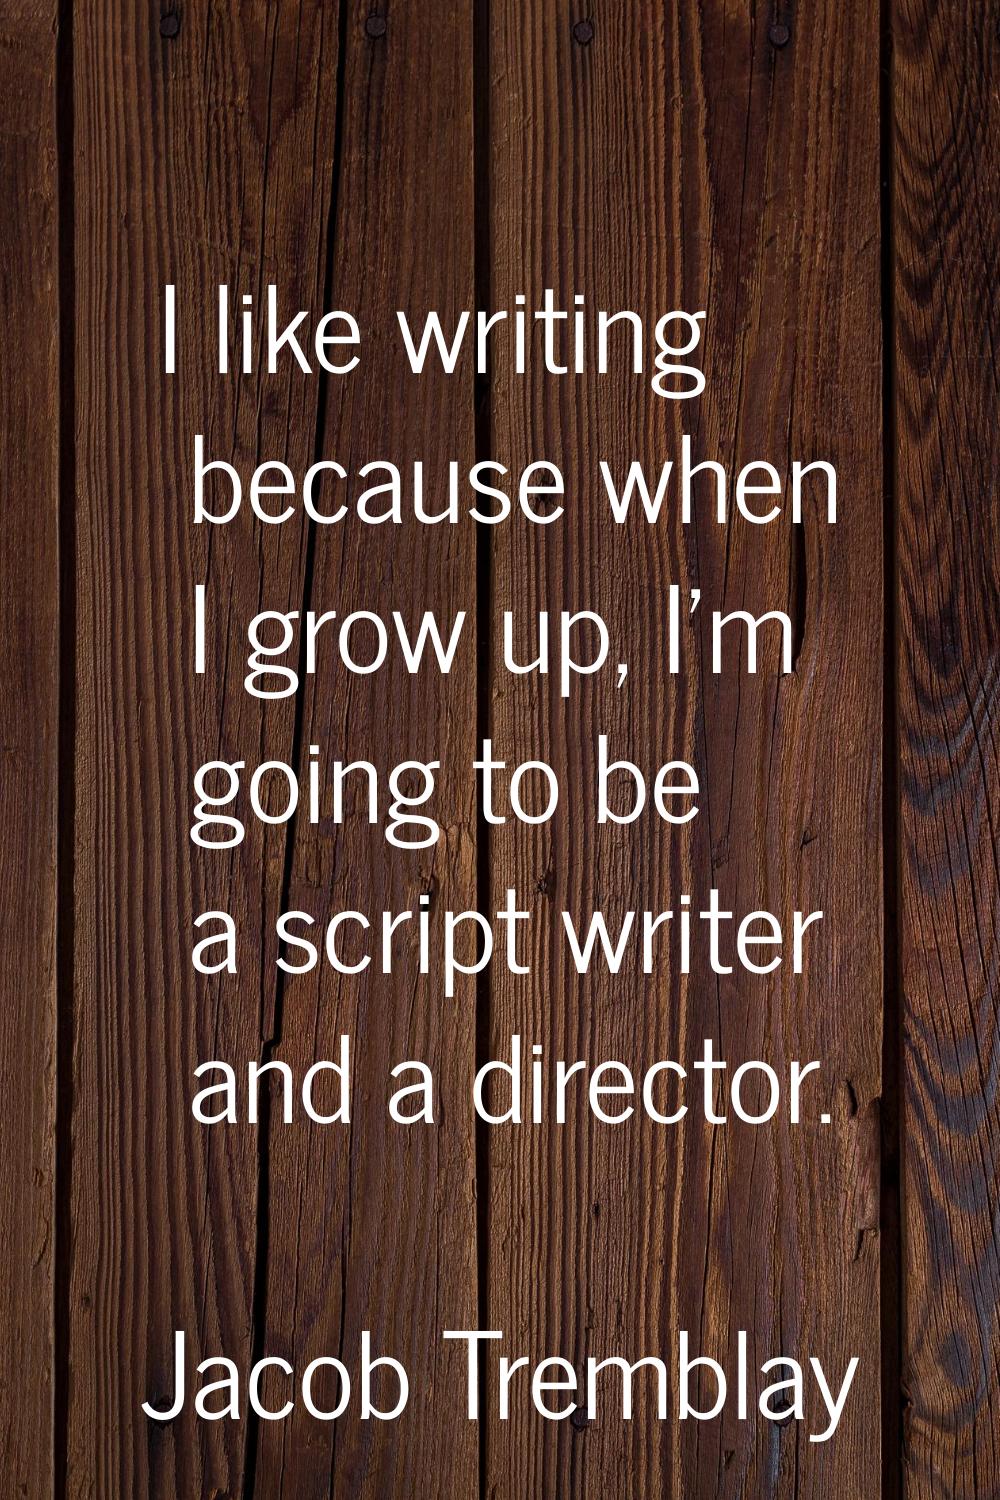 I like writing because when I grow up, I'm going to be a script writer and a director.